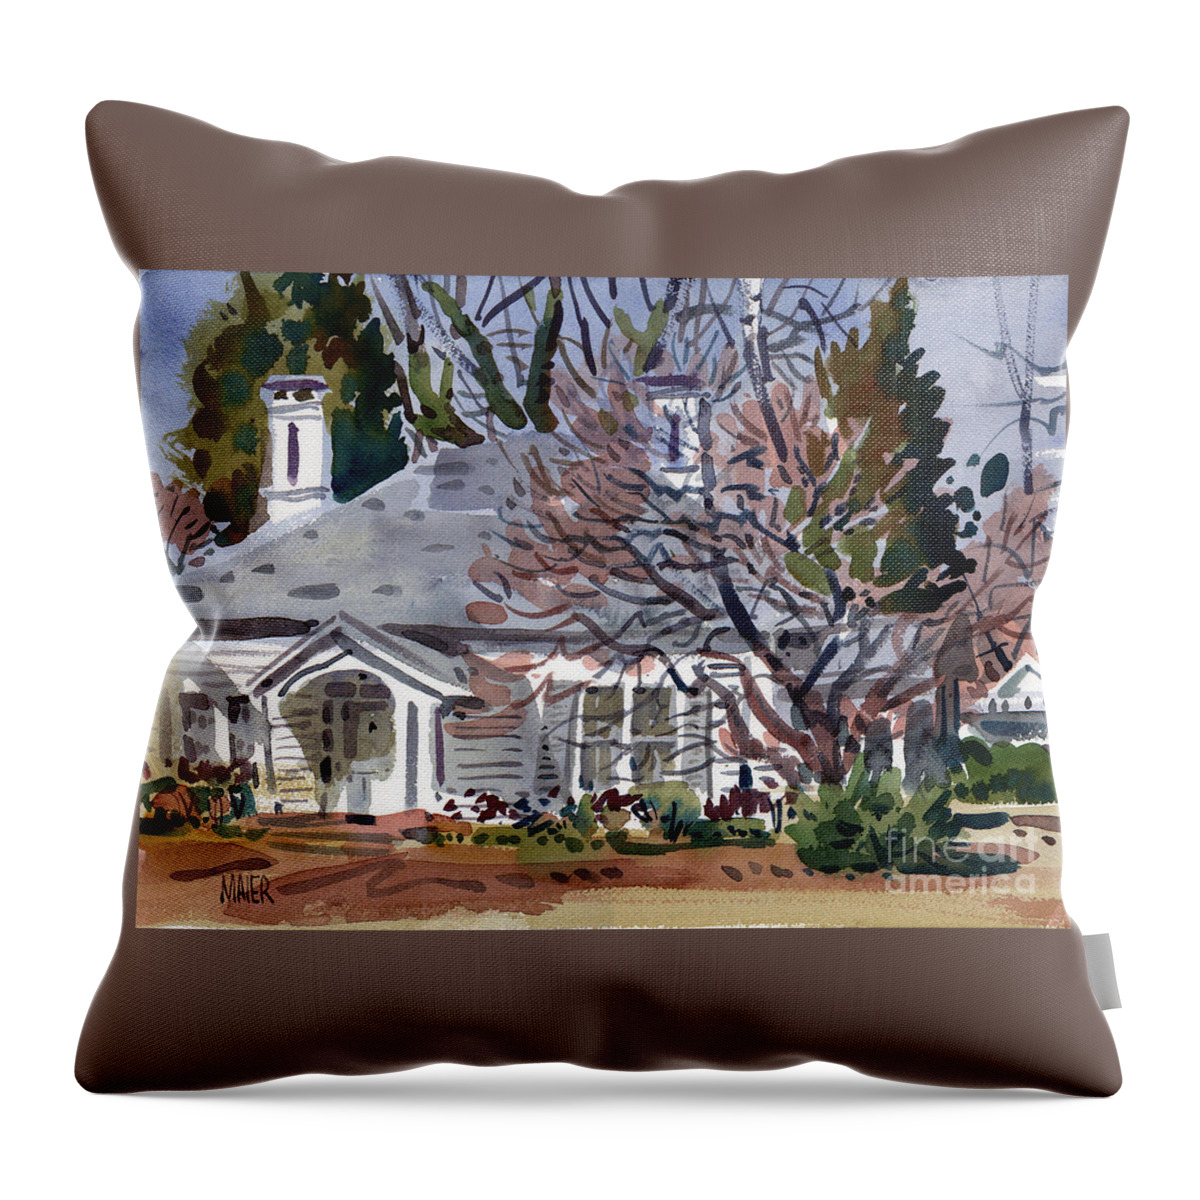 Tapp House Throw Pillow featuring the painting Tapp House by Donald Maier